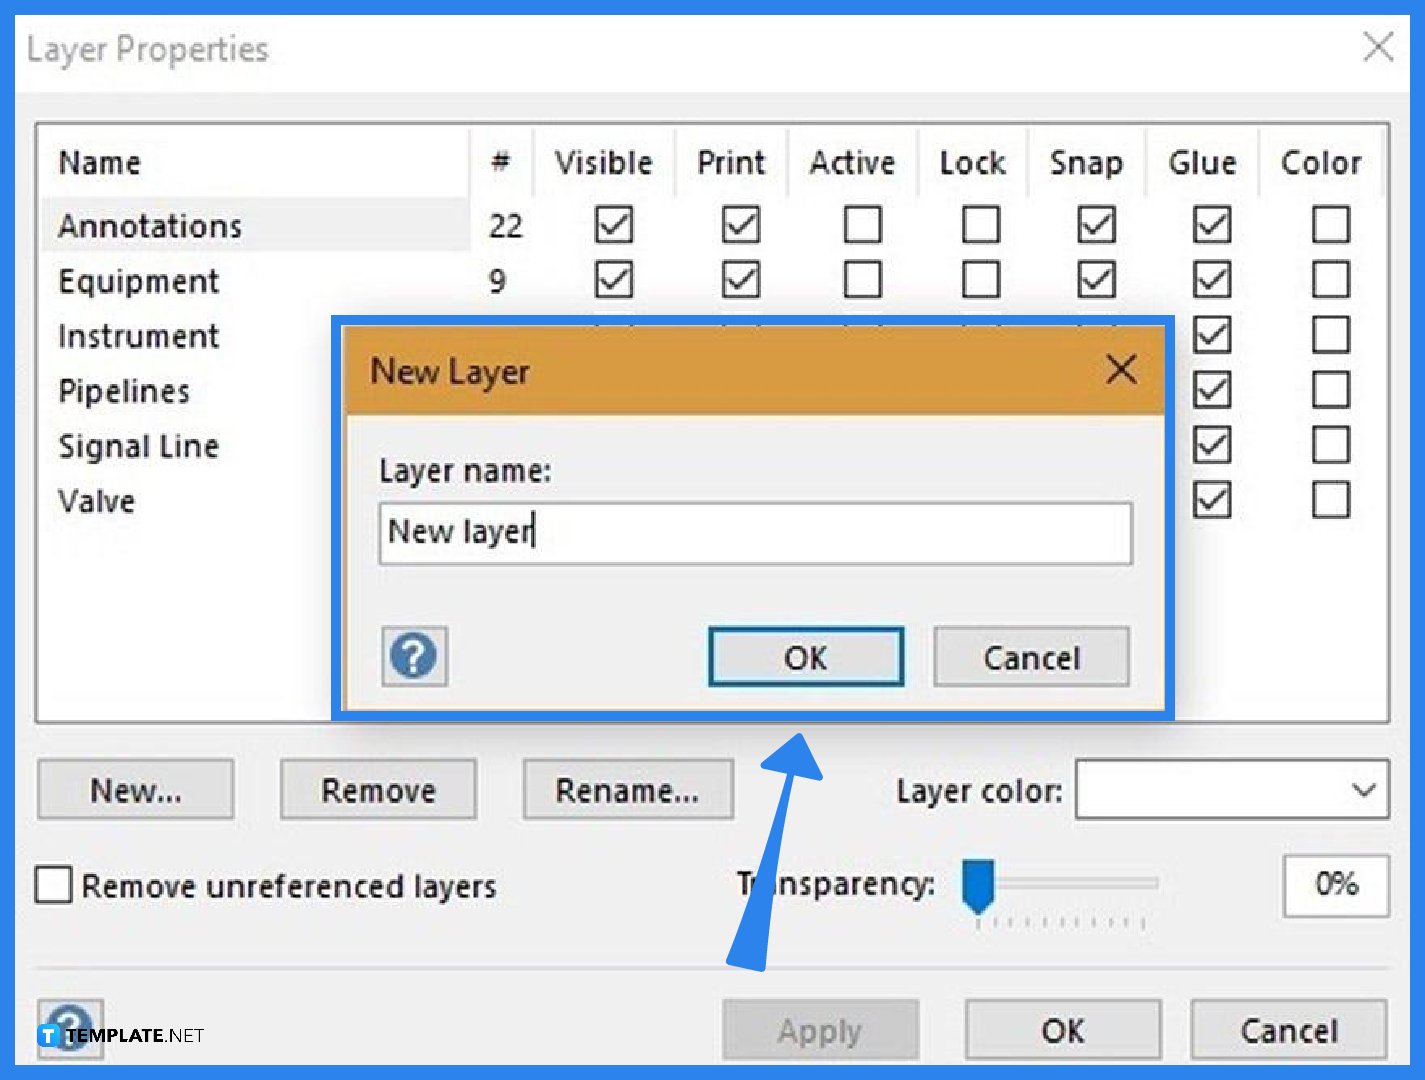 How to Use Layers in Microsoft Visio - Step 2